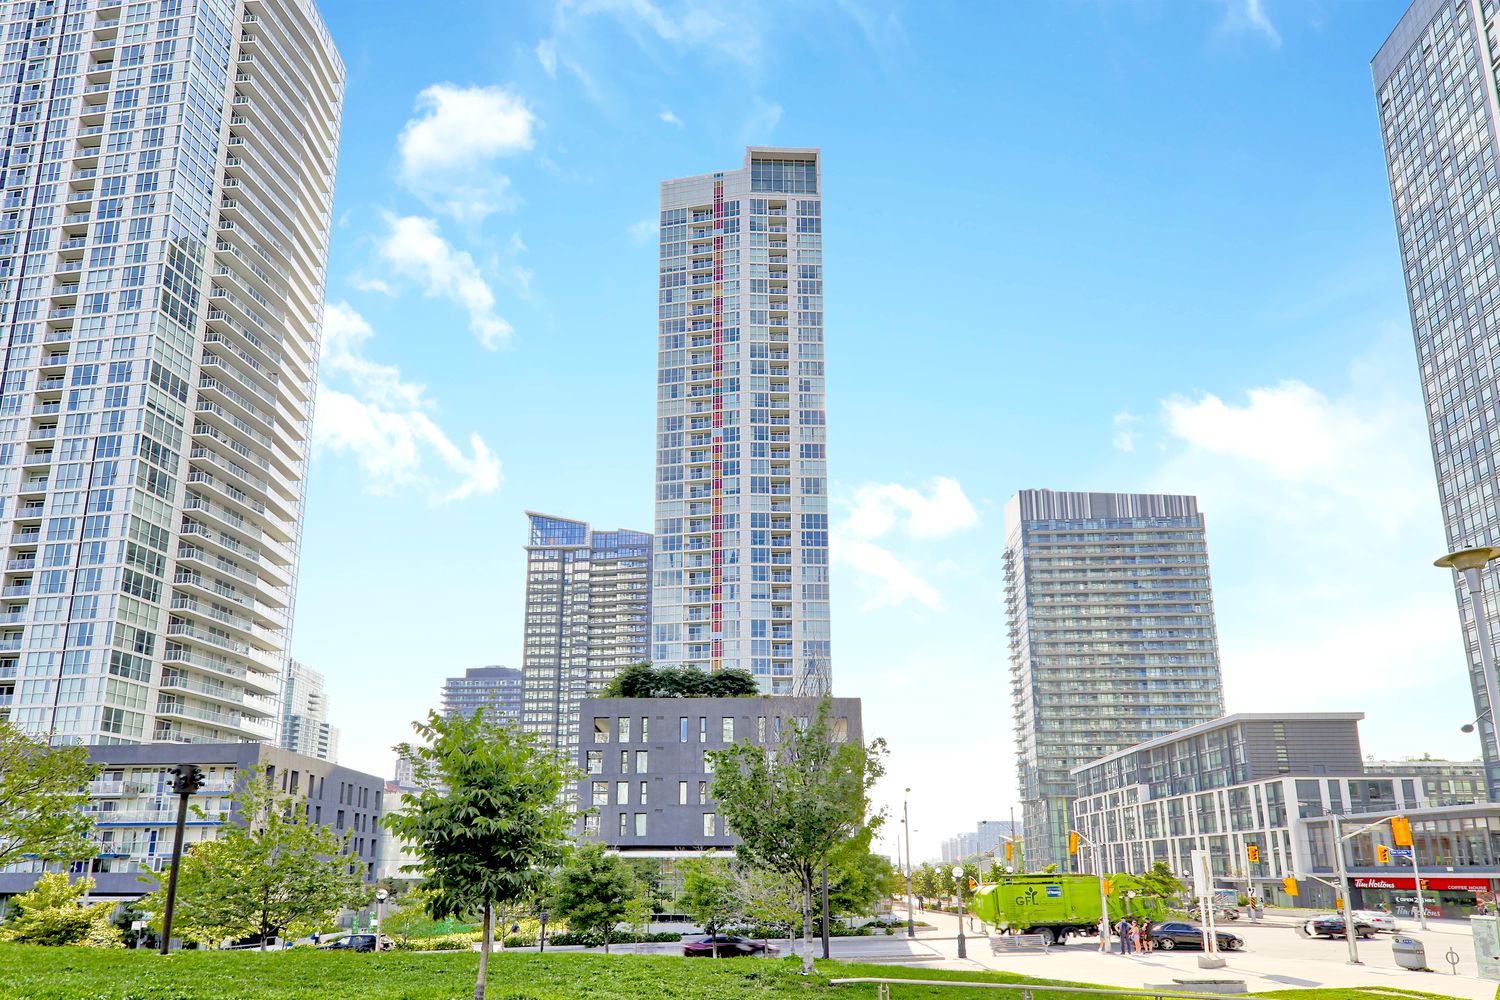 75-85 Queens Wharf Road. Quartz | Spectra Condos is located in  Downtown, Toronto - image #3 of 7